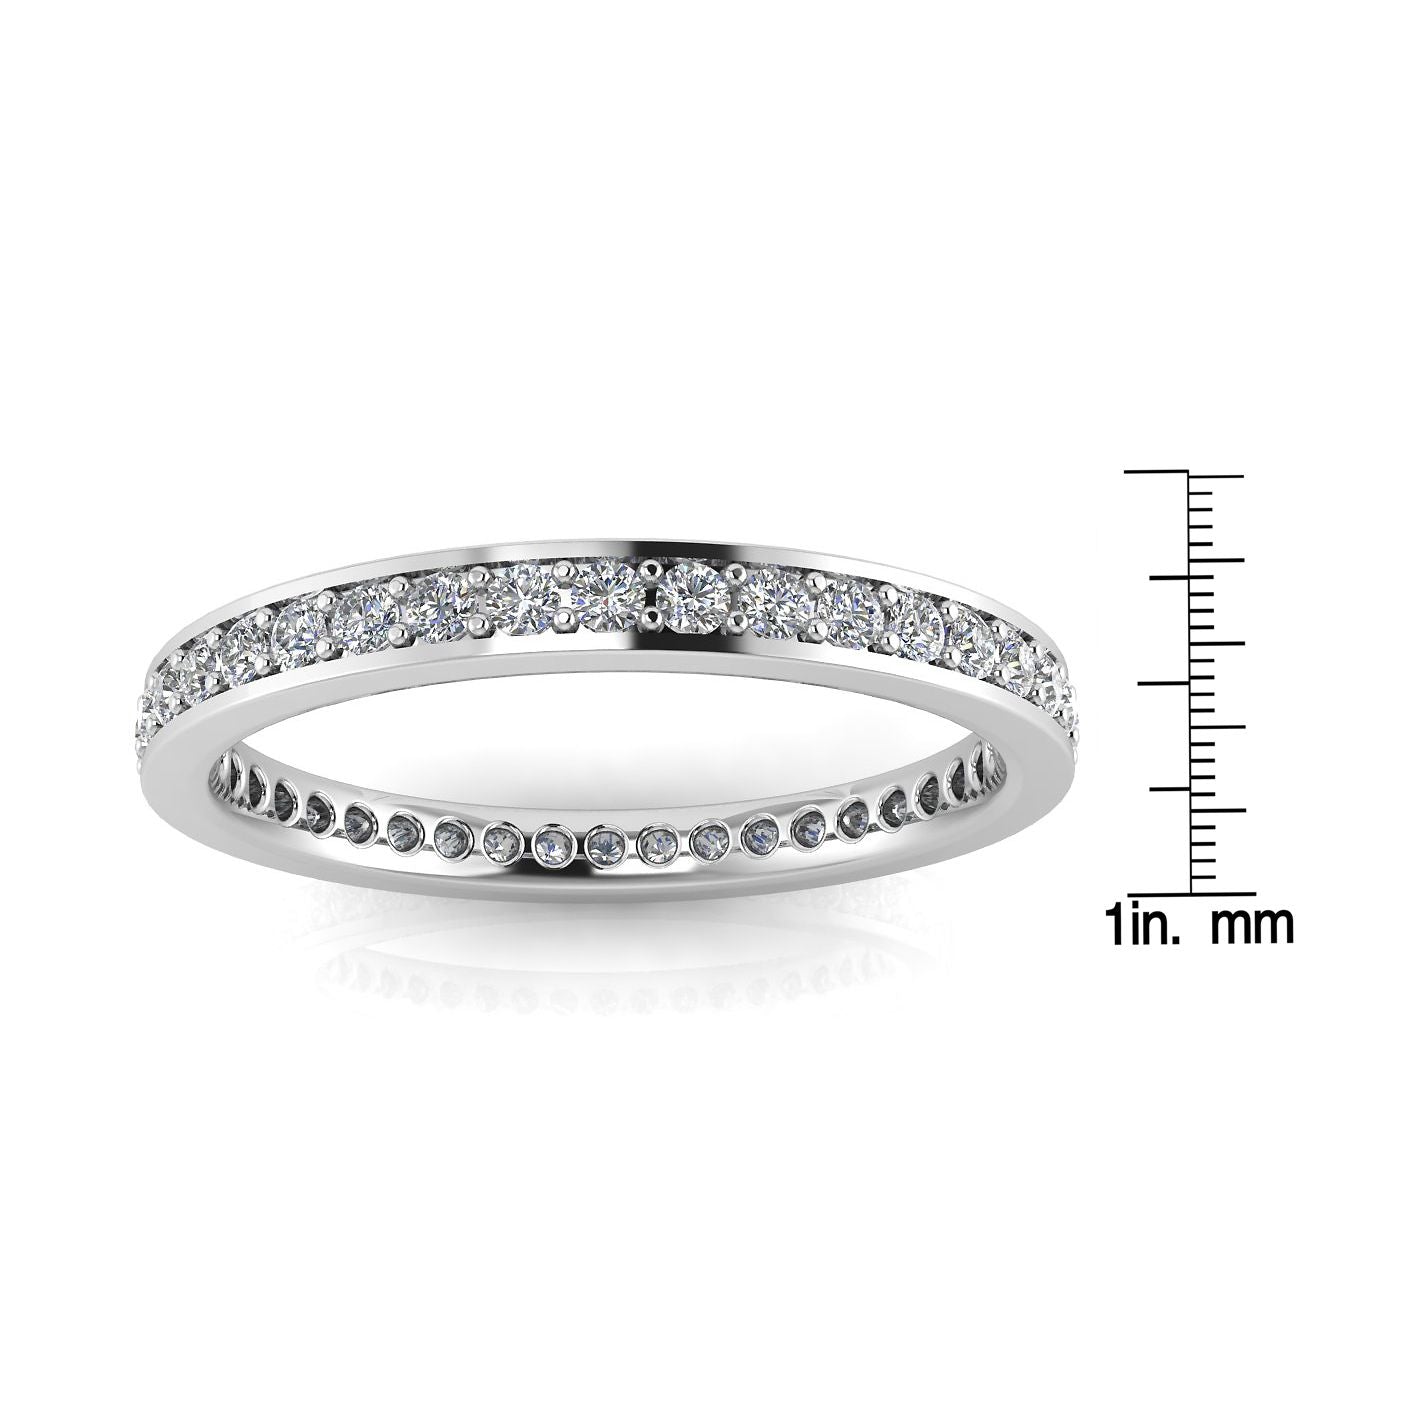 Round Brilliant Cut Diamond Channel Pave Set Eternity Ring In Platinum  (1.02ct. Tw.) Ring Size 8.5